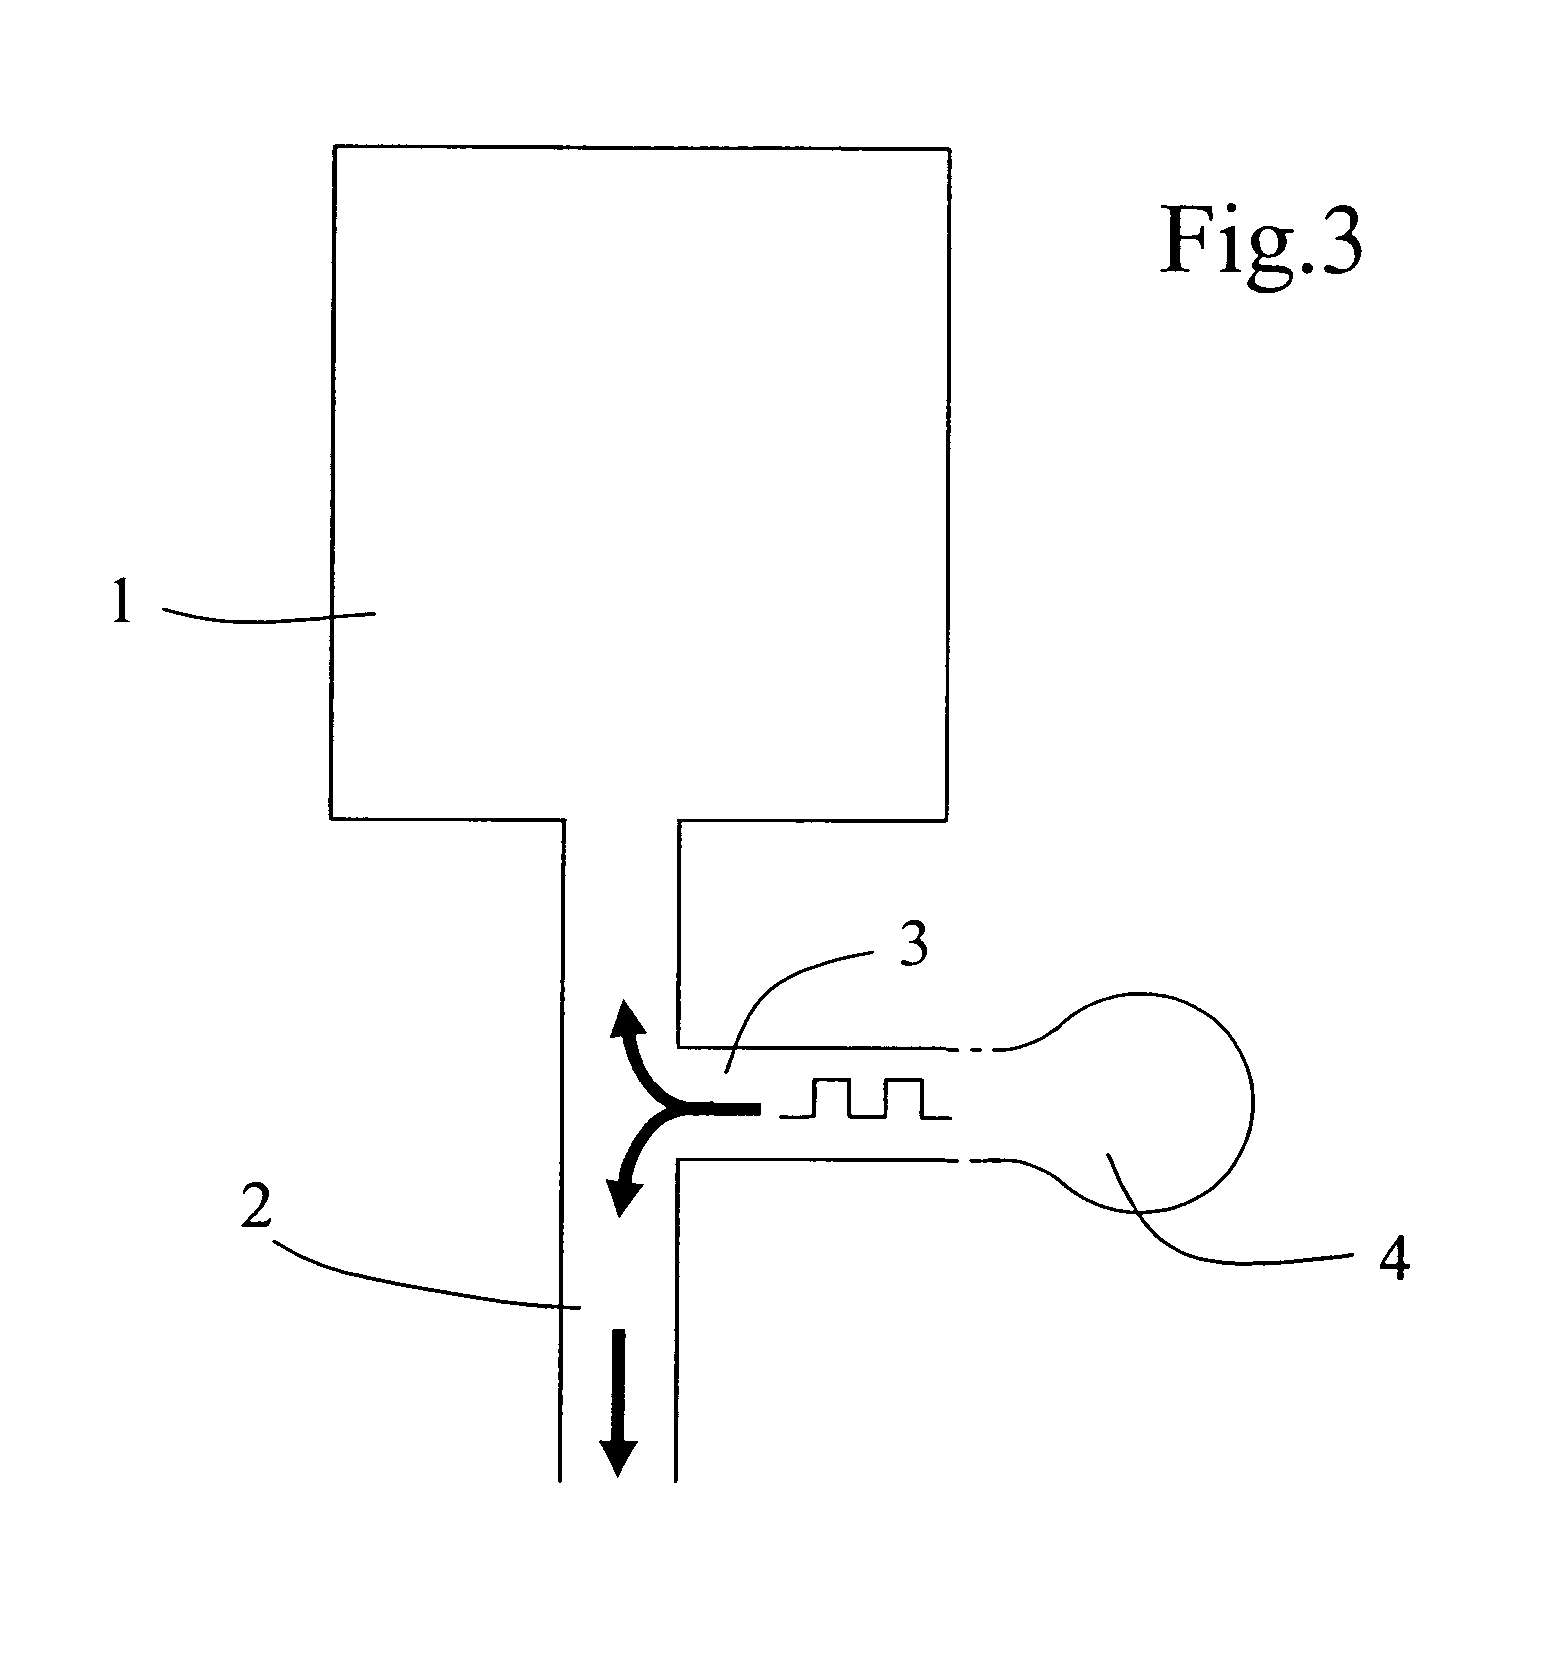 Simplified cleaning and filling device